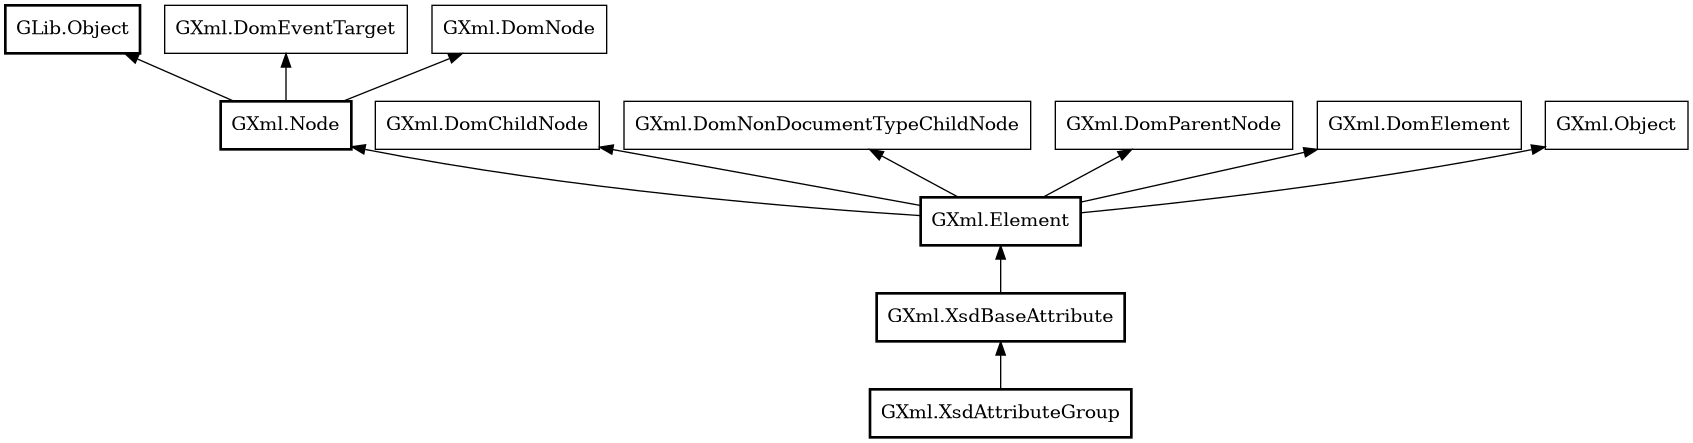 Object hierarchy for XsdAttributeGroup